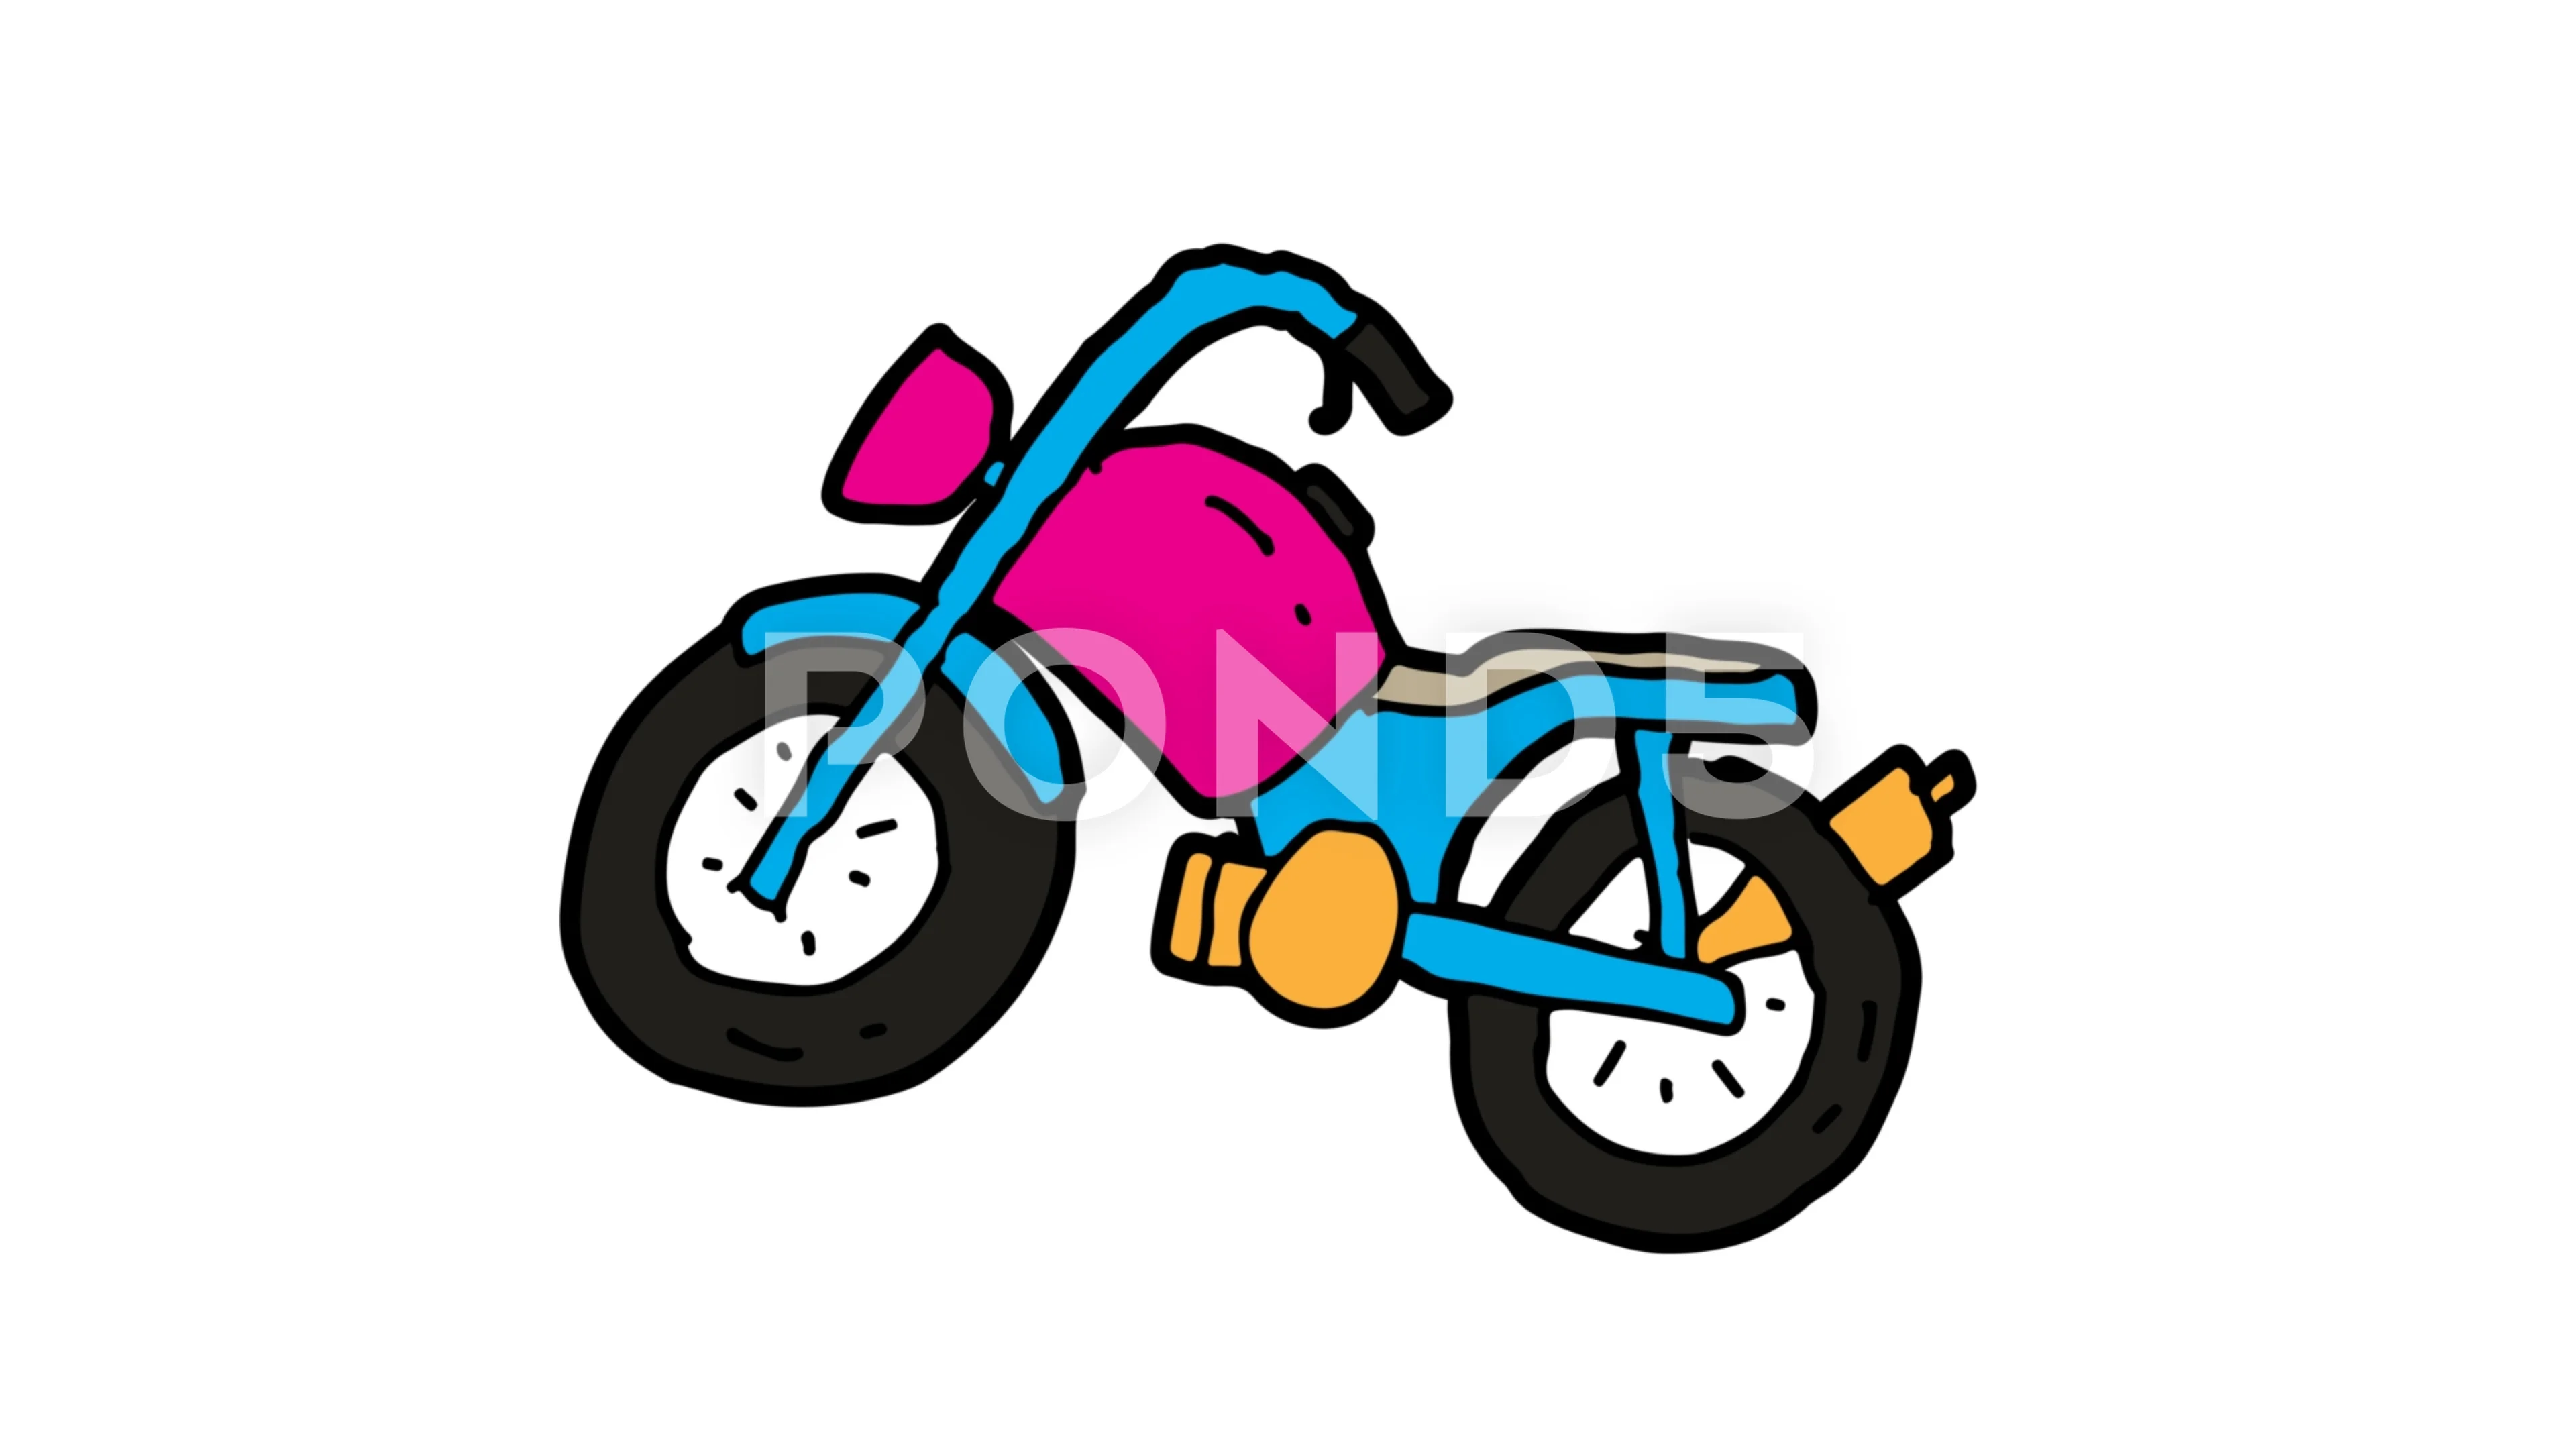 Easy How to Draw a Bike Tutorial and Bike Coloring Page | Bicycle drawing,  Kids art projects, Art drawings for kids